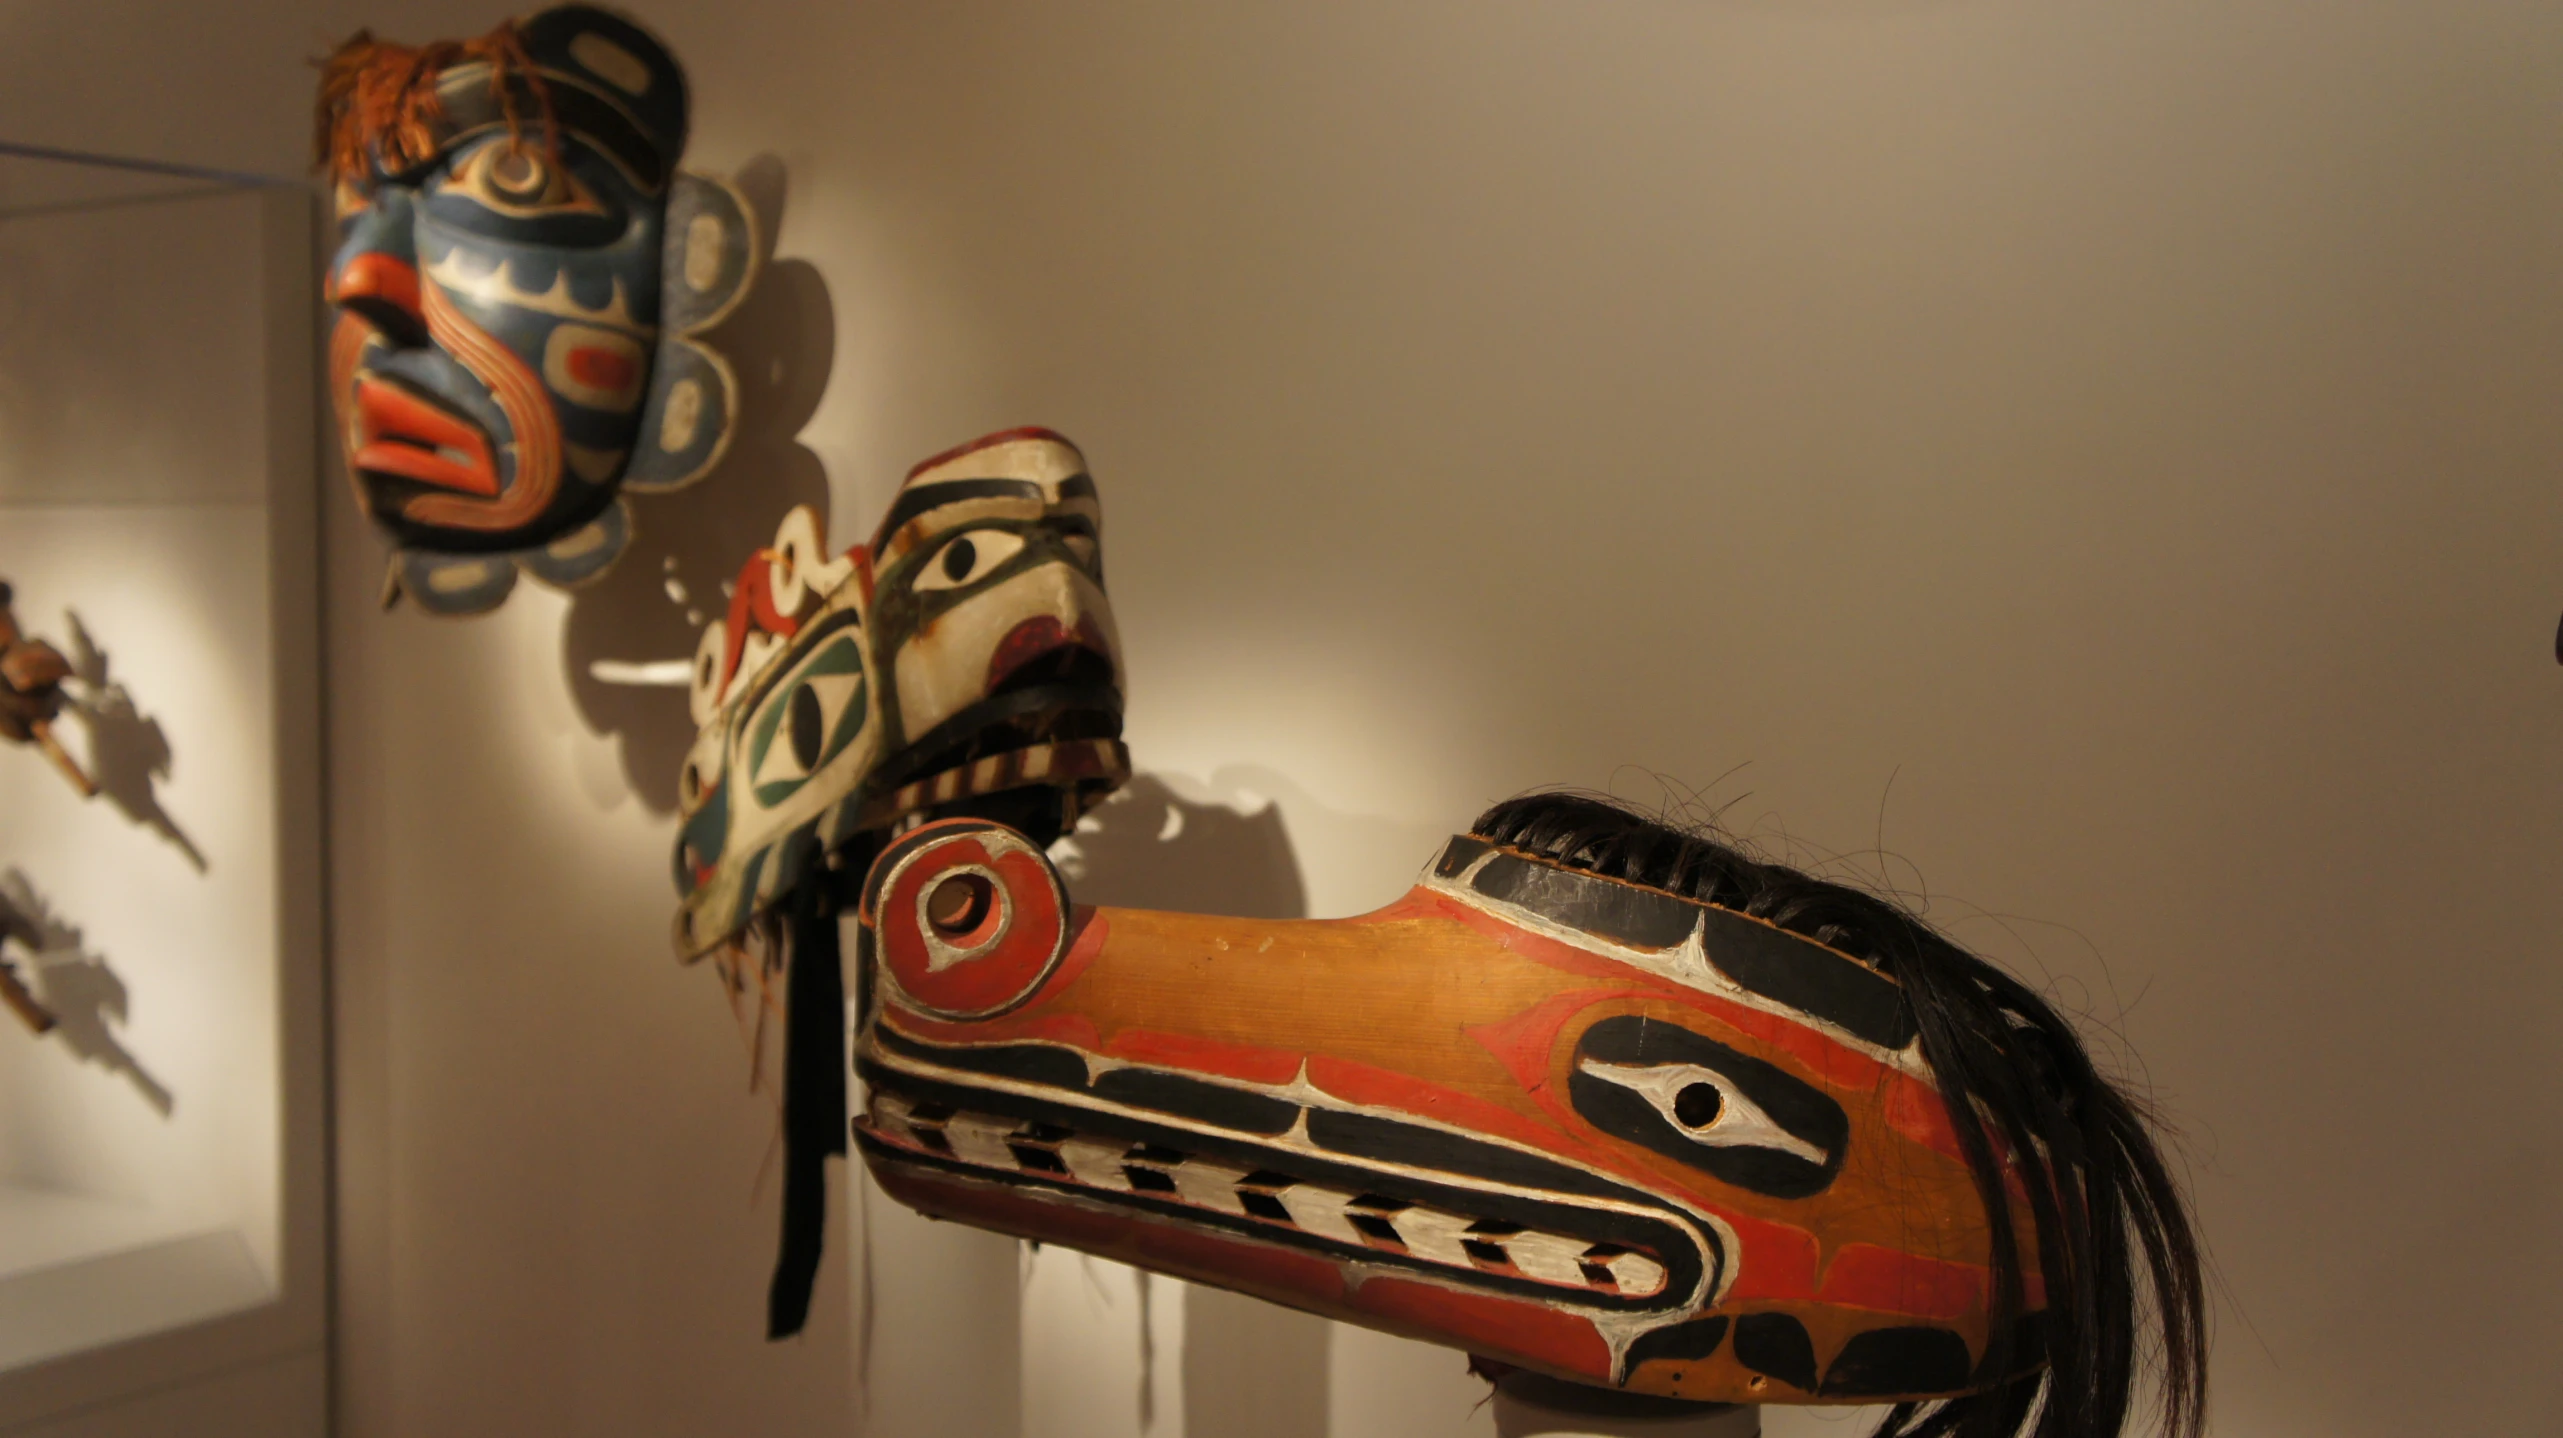 mask sculptures are displayed on the wall by each other